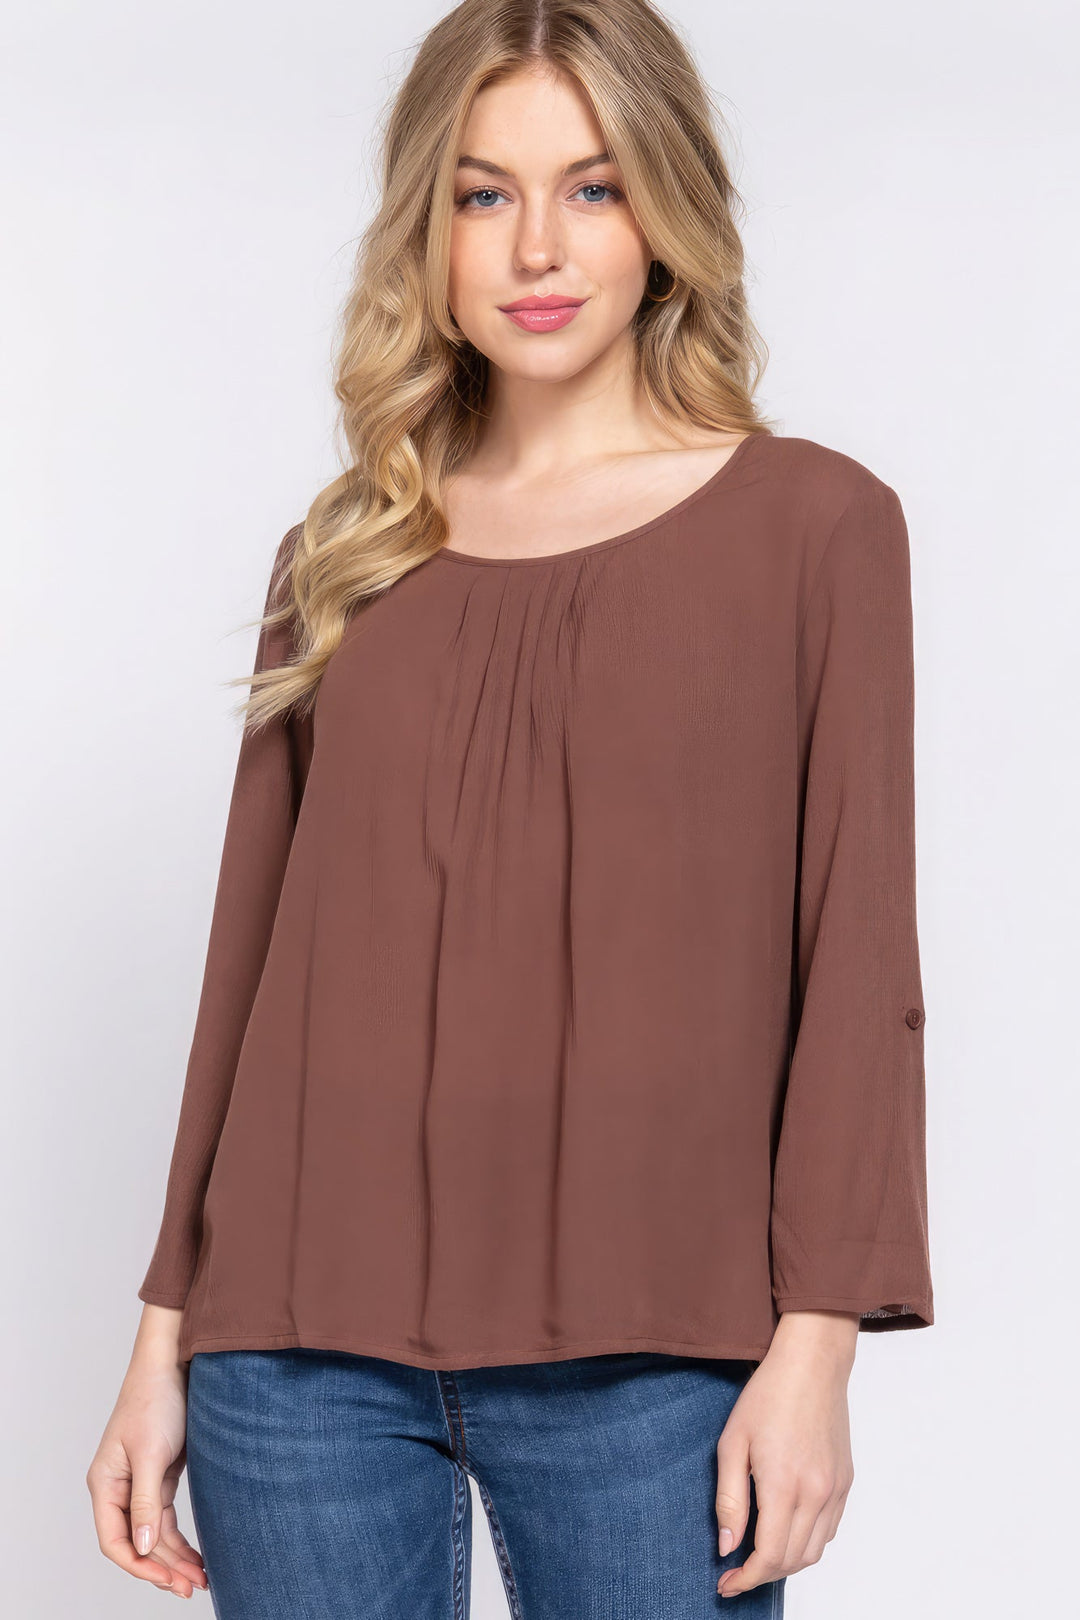 The802Gypsy  shirts and tops Brown / S ❤GYPSY LOVE-Roll Up Slv Pleated Blouse